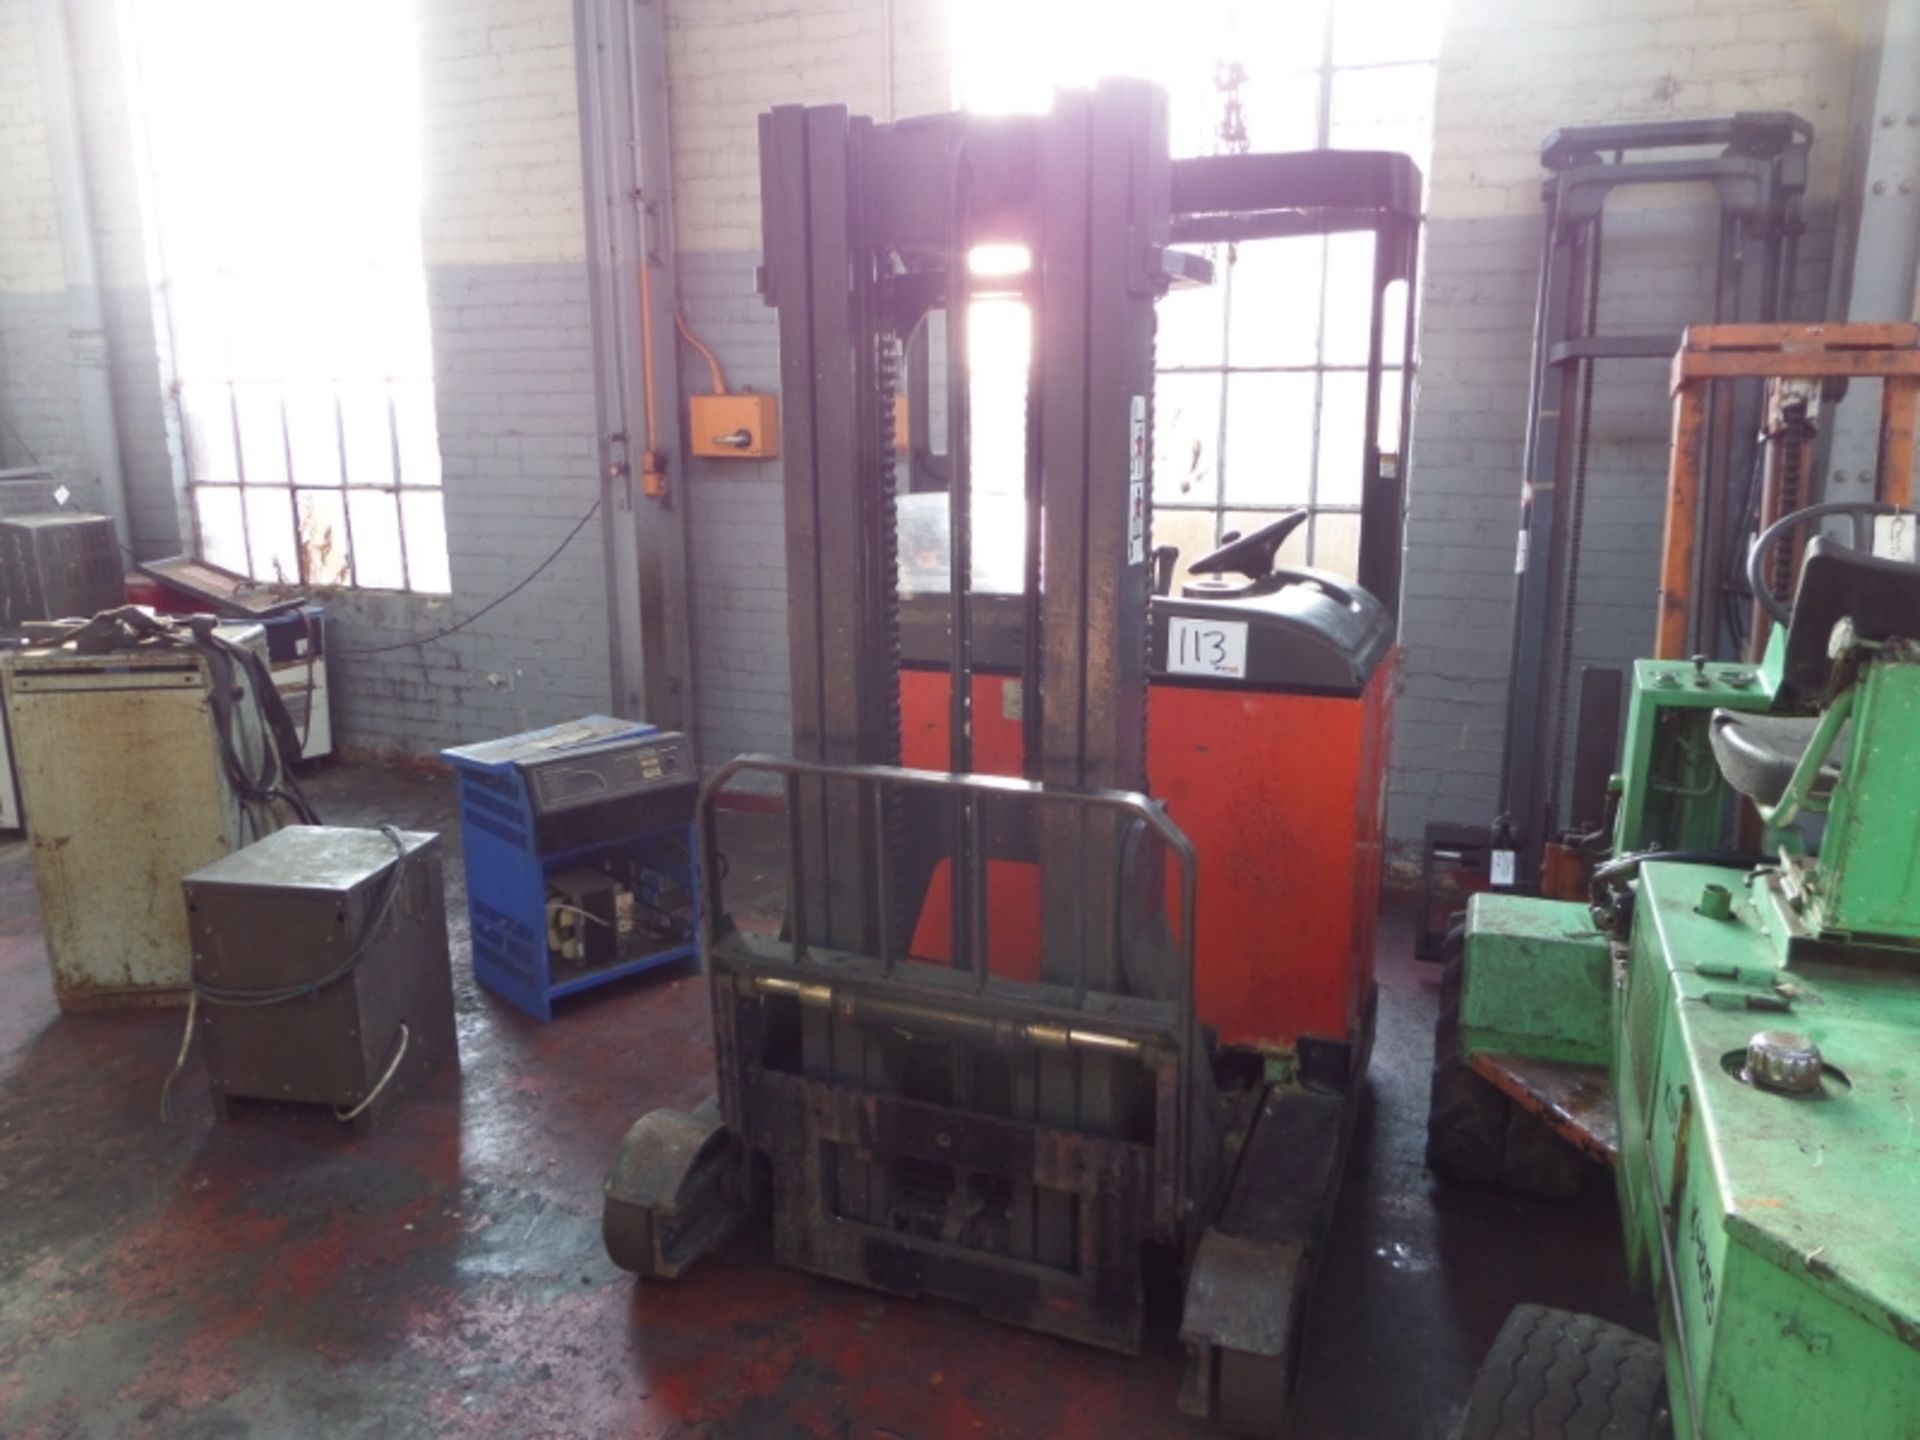 LINDE R14 Plant Electric - VIN: 113G07011214 - Year: 1996 - . Hours - Duplex Reach Truck - Image 4 of 4